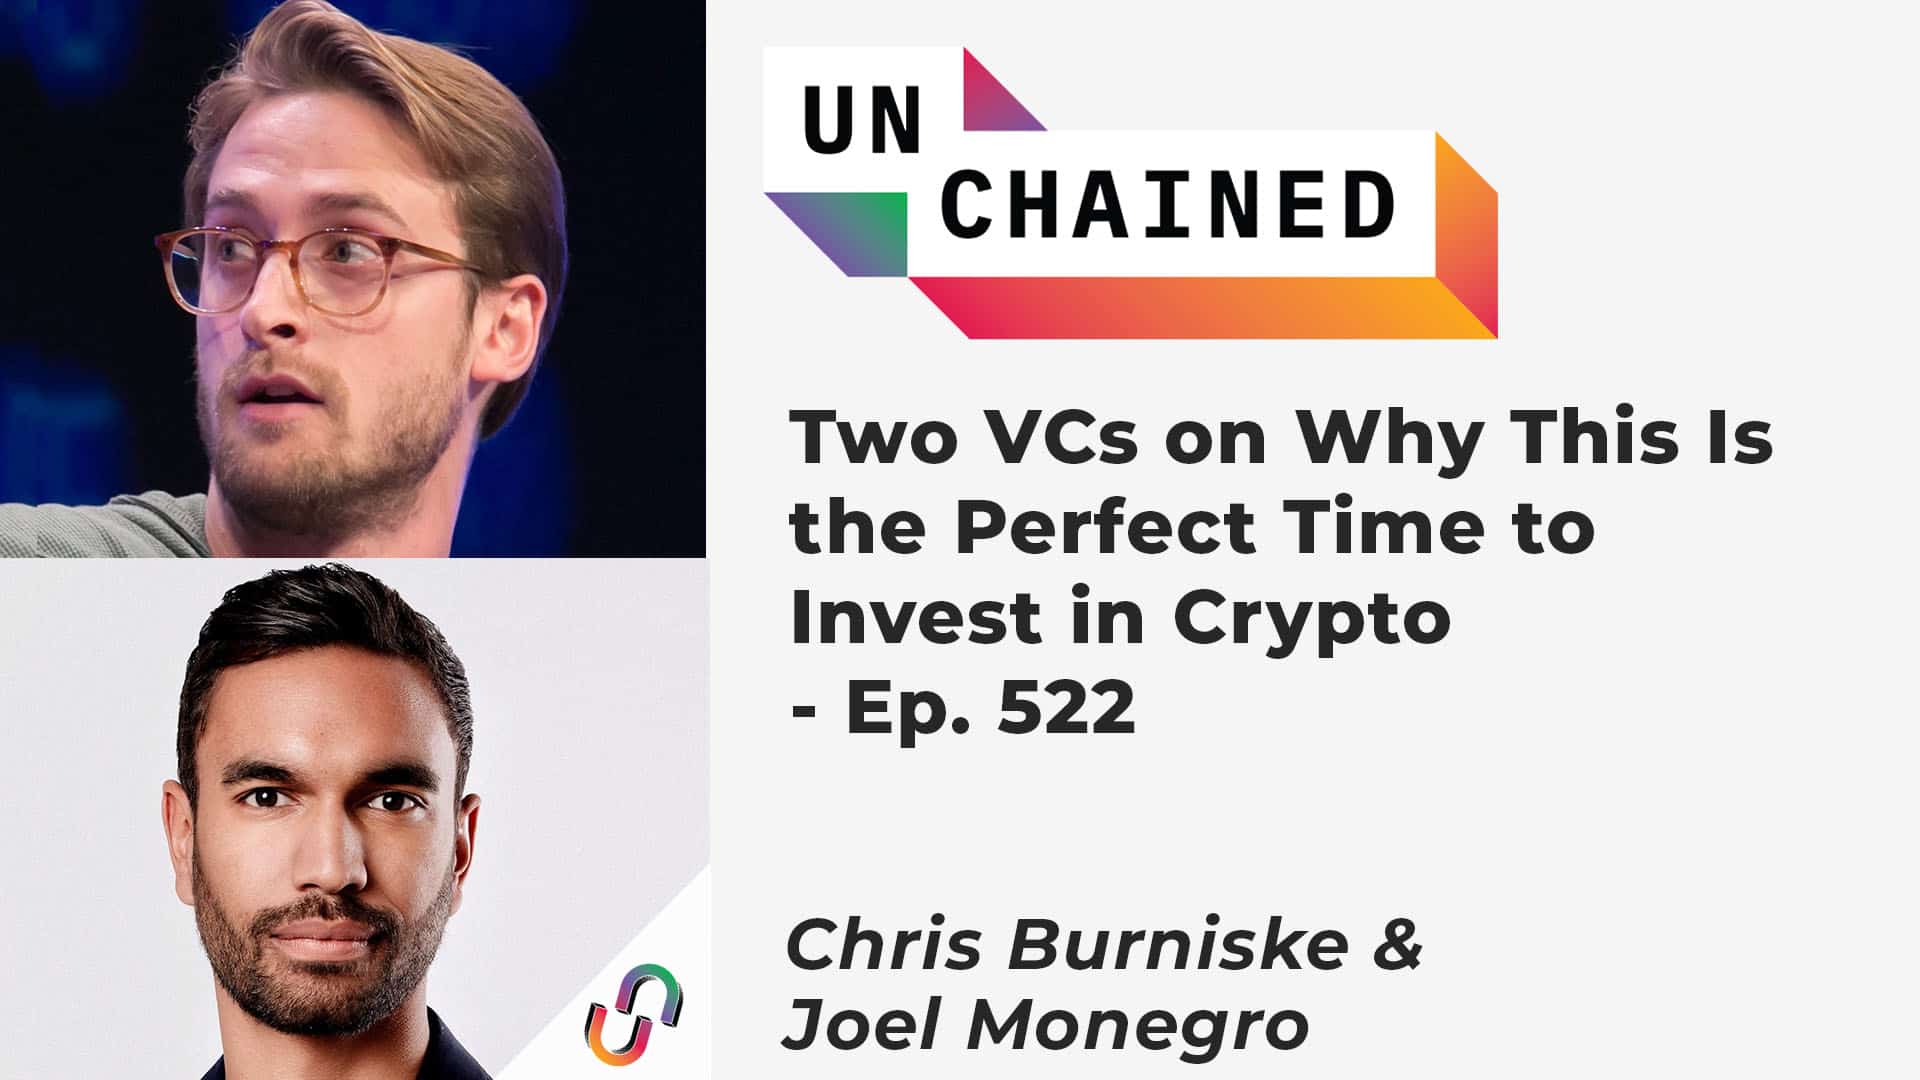 Two VCs on Why This Is the Perfect Time to Invest in Crypto - Ep. 522